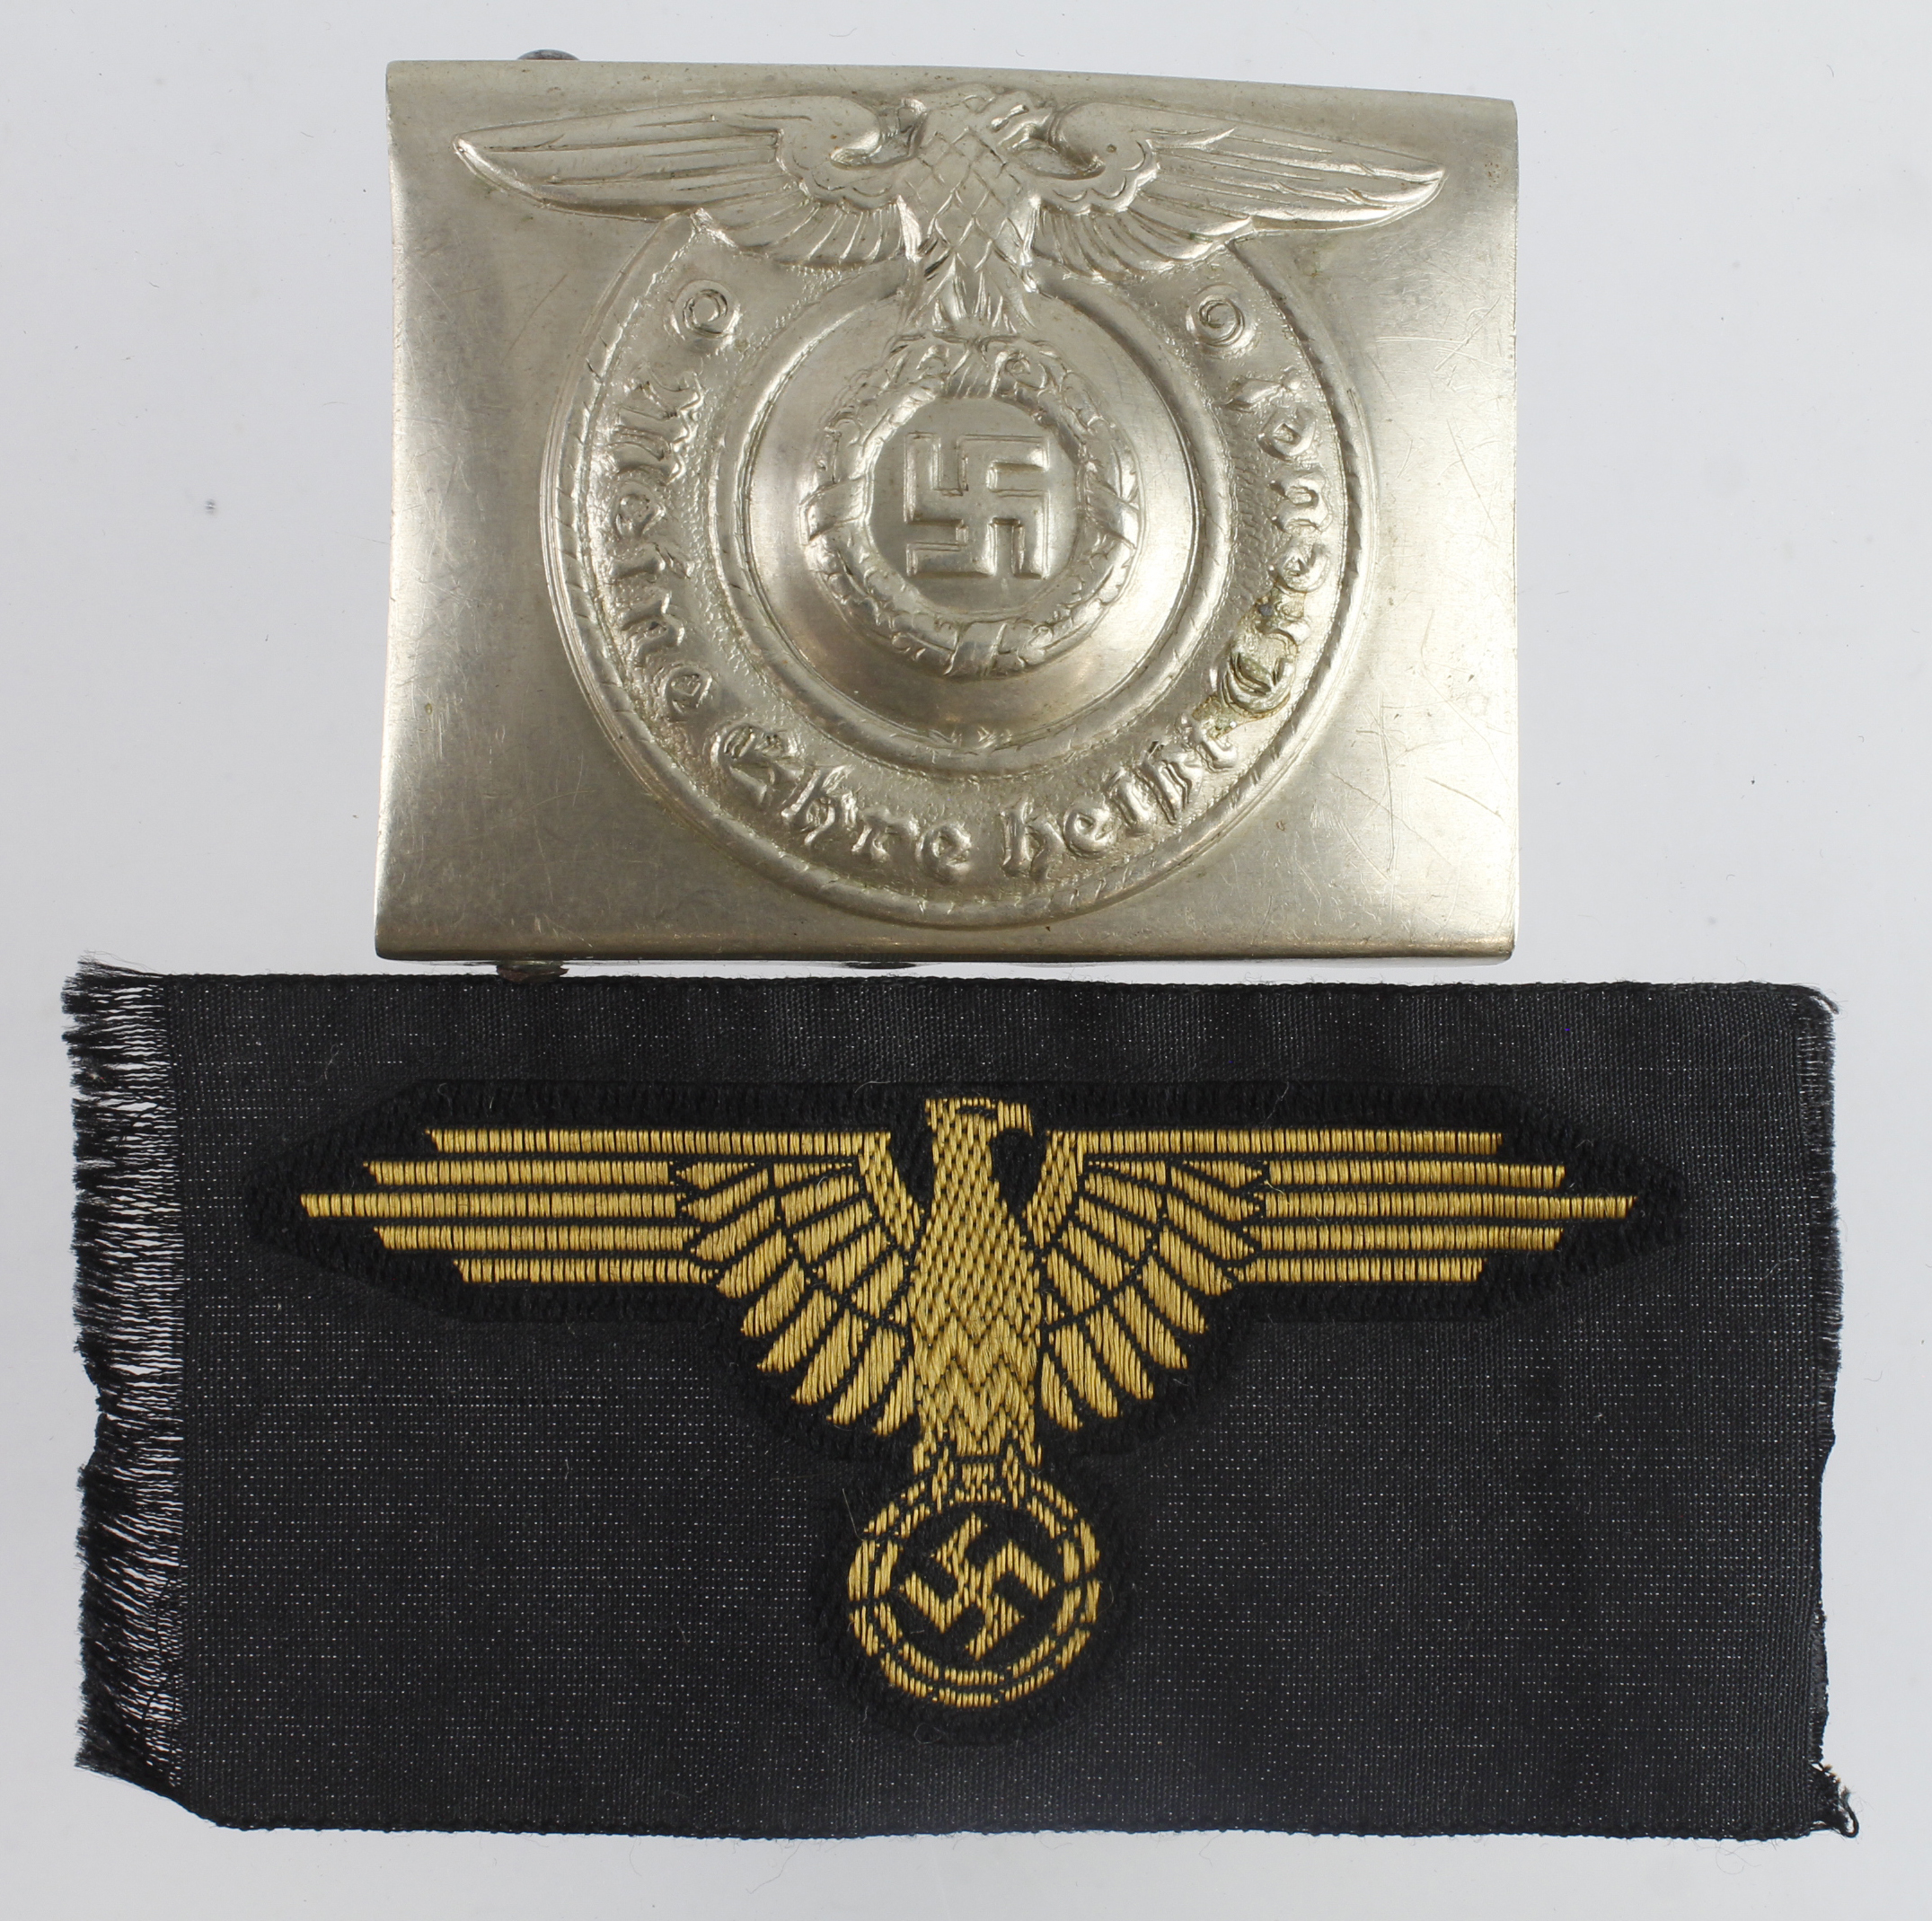 Germany from a one owner collection an SS Belt buckle and Bevo cloth eagle.